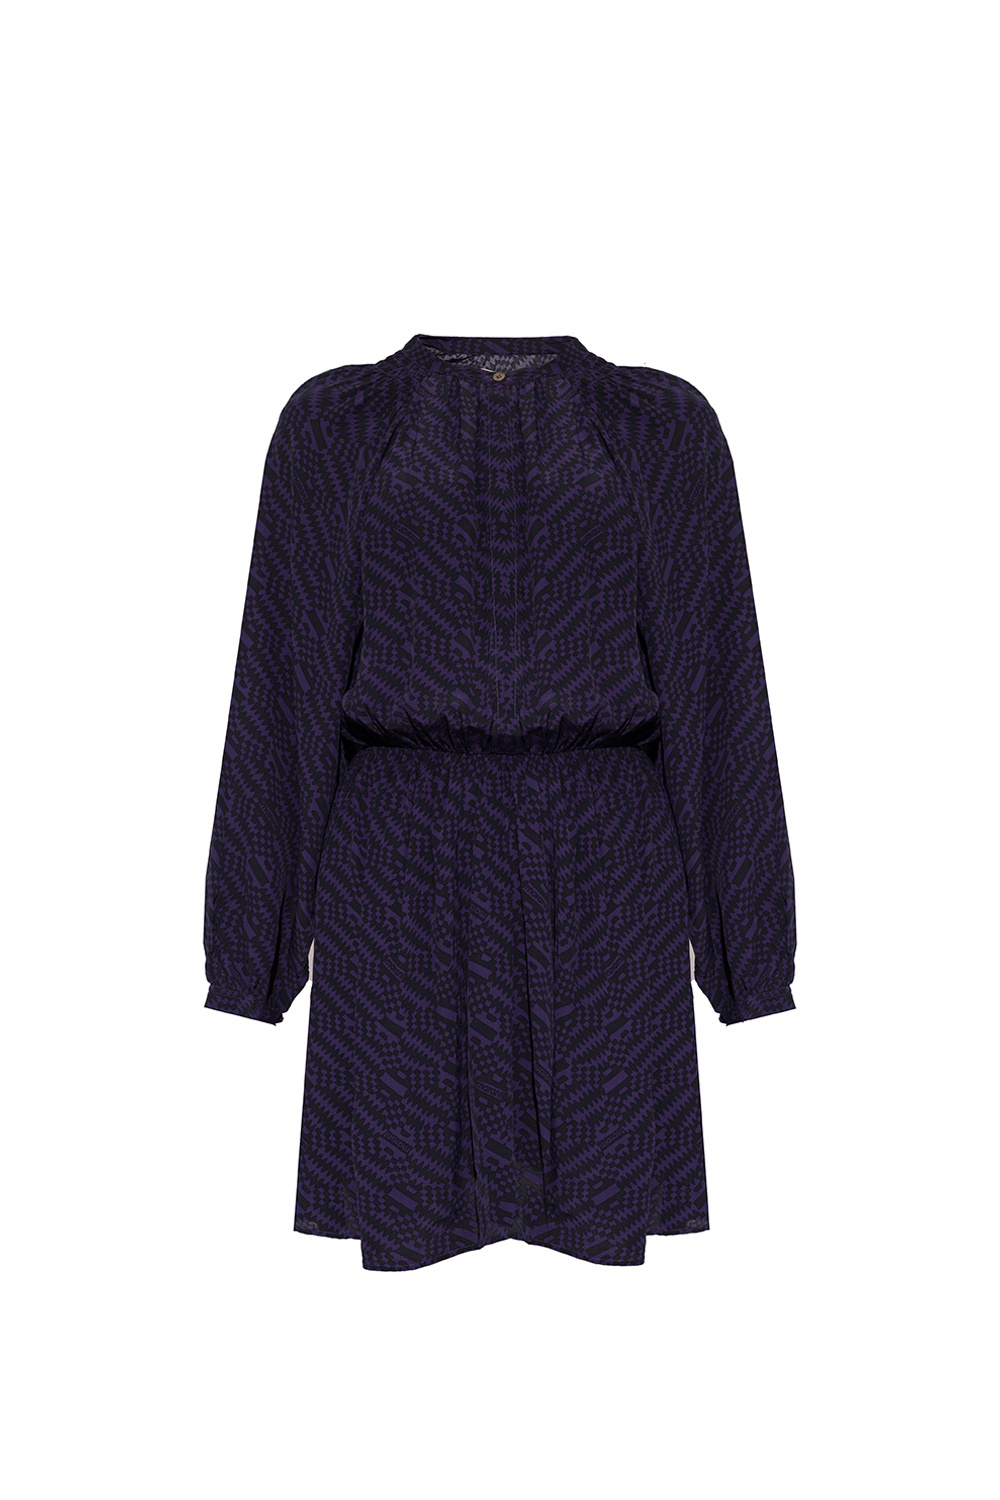 Isabel Marant Étoile ‘Amandine’ brodees dress with puff sleeves